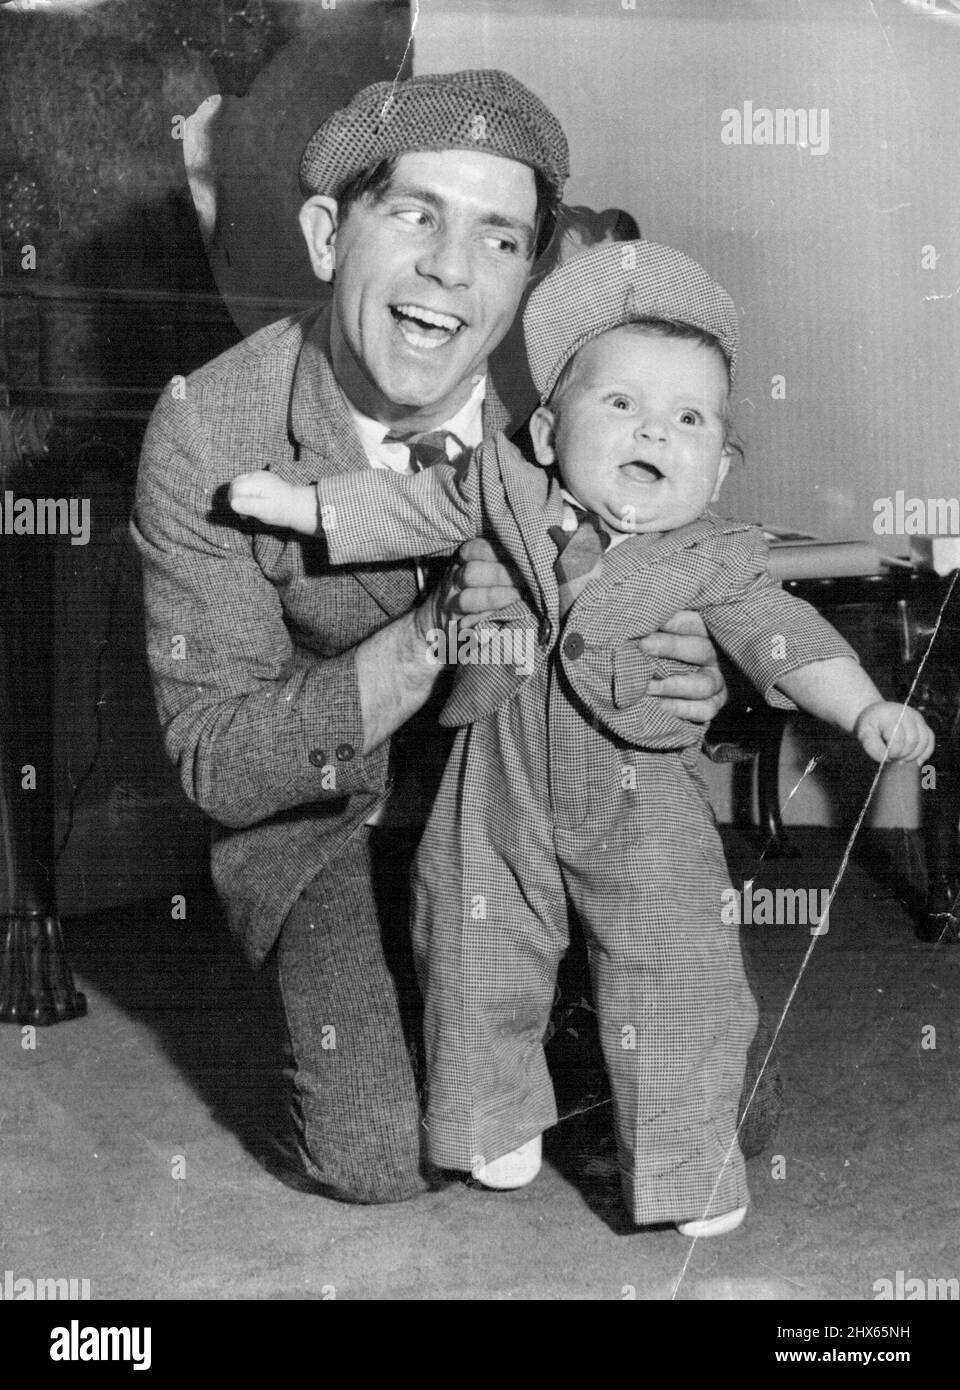 Christmas - I'm Ready For It - Bubbling over with Christmas fun and ready to throw him self about like father is Nicholas, his months-old son of comedian Norman Wisdom, who's restraining his effervescent youngster at the Empress Hall, London. Nicholas, about to celebrate his first Christmas, wears one of his presents - a suit just like dad's made for him by members of the 'Sinbad the Sailor on Ice' Show, in which Norman stars at the Empress Hall. December 23, 1953. (Photo by Reuterphoto). Stock Photo